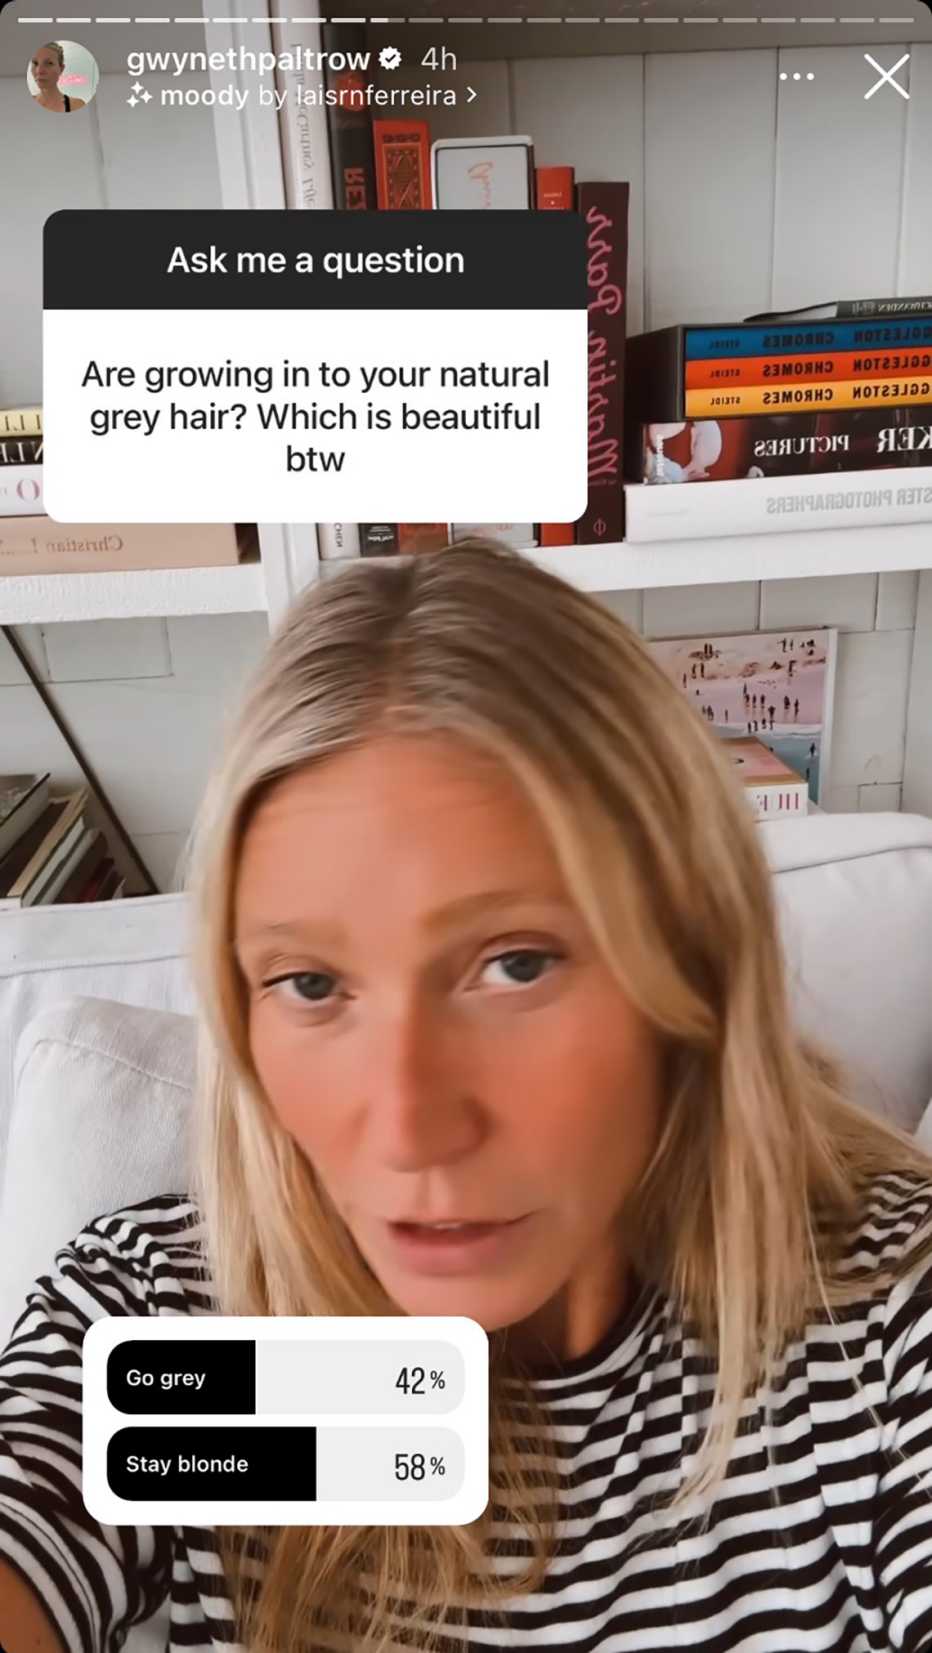 gwyneth paltrow on her instagram story answering a question if she is growing in her natural gray hair color